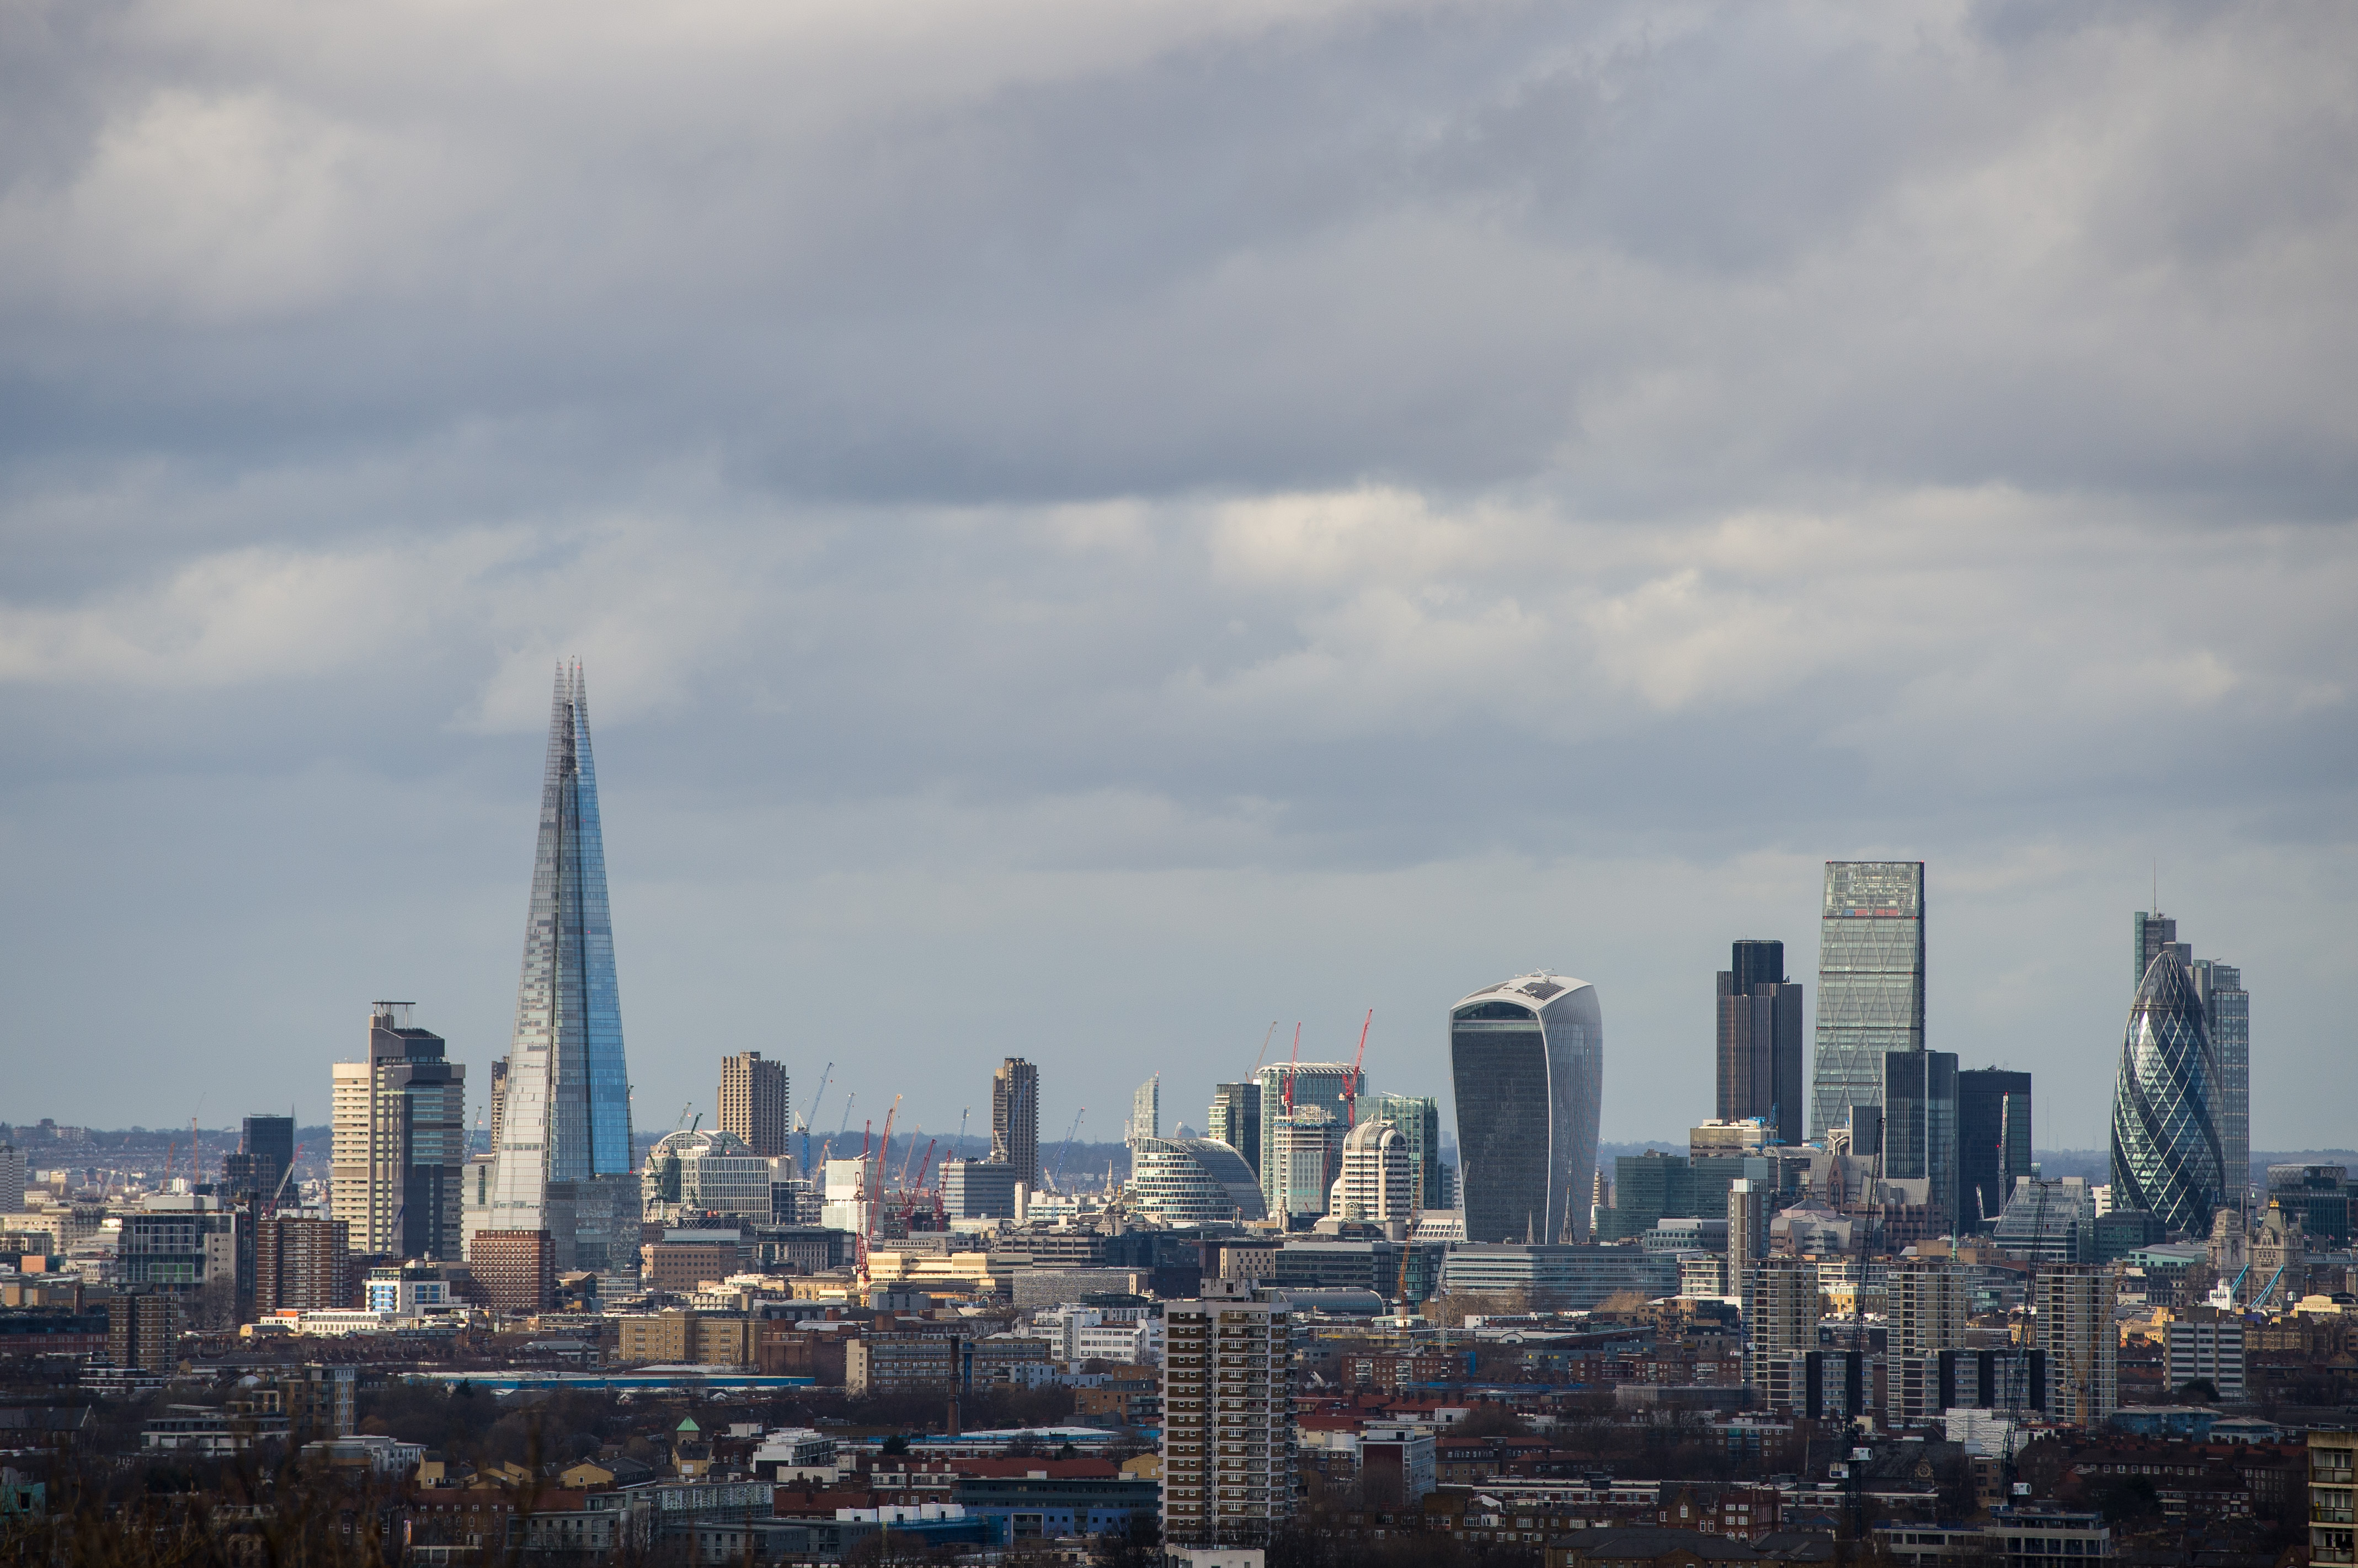 A general view of the London skyline, including the Shard